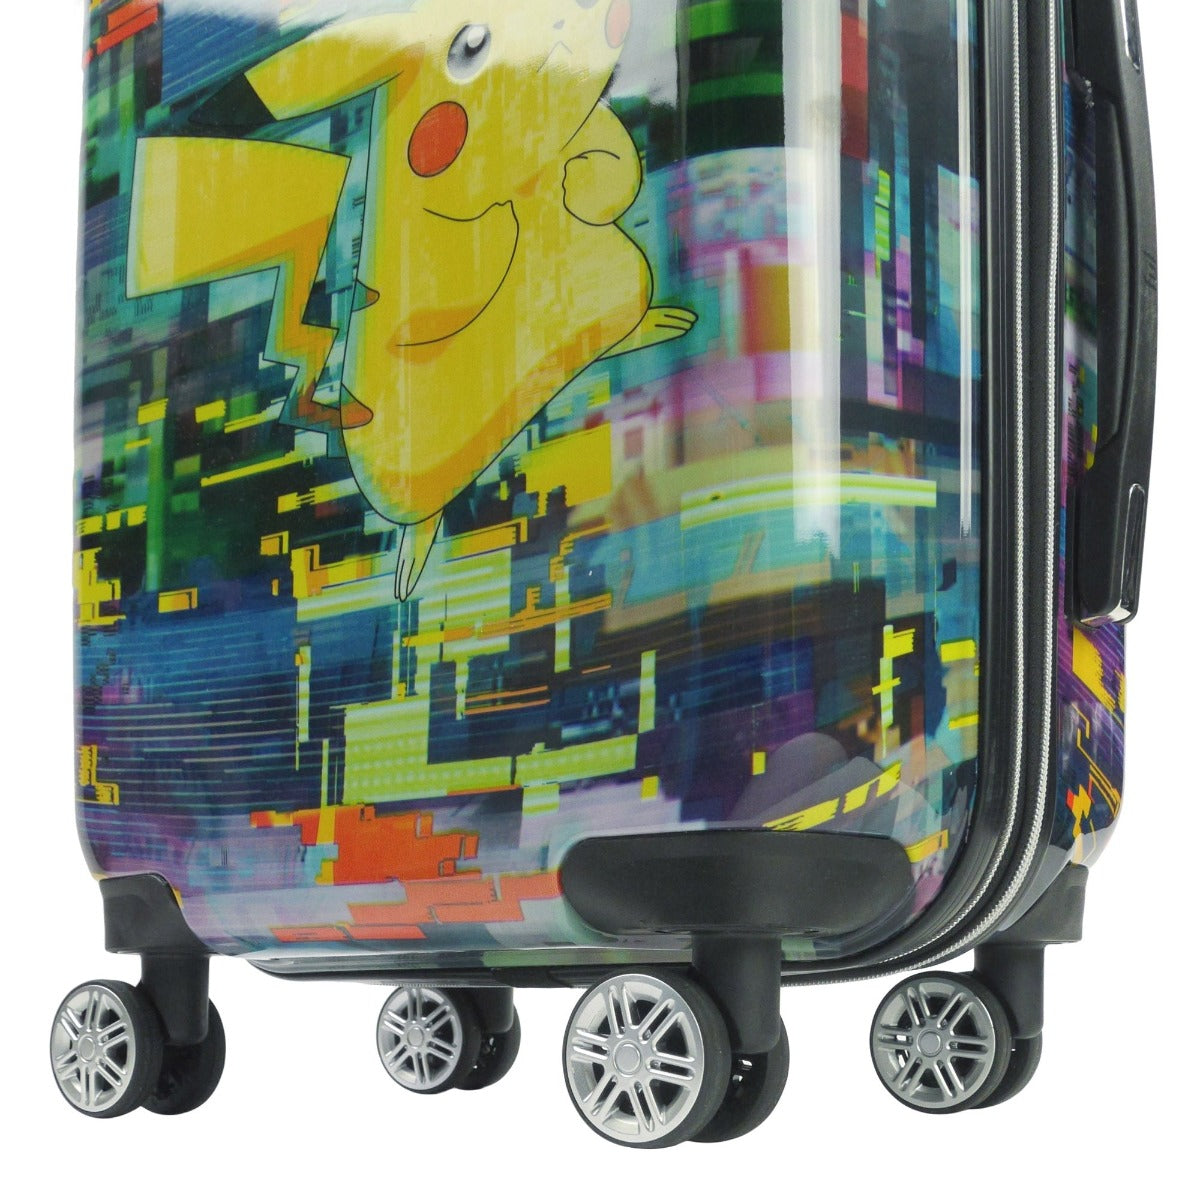 Pokemon Pikachu Luggage 21 inch carry on hard sided Ful 360 spinner wheels suitcase